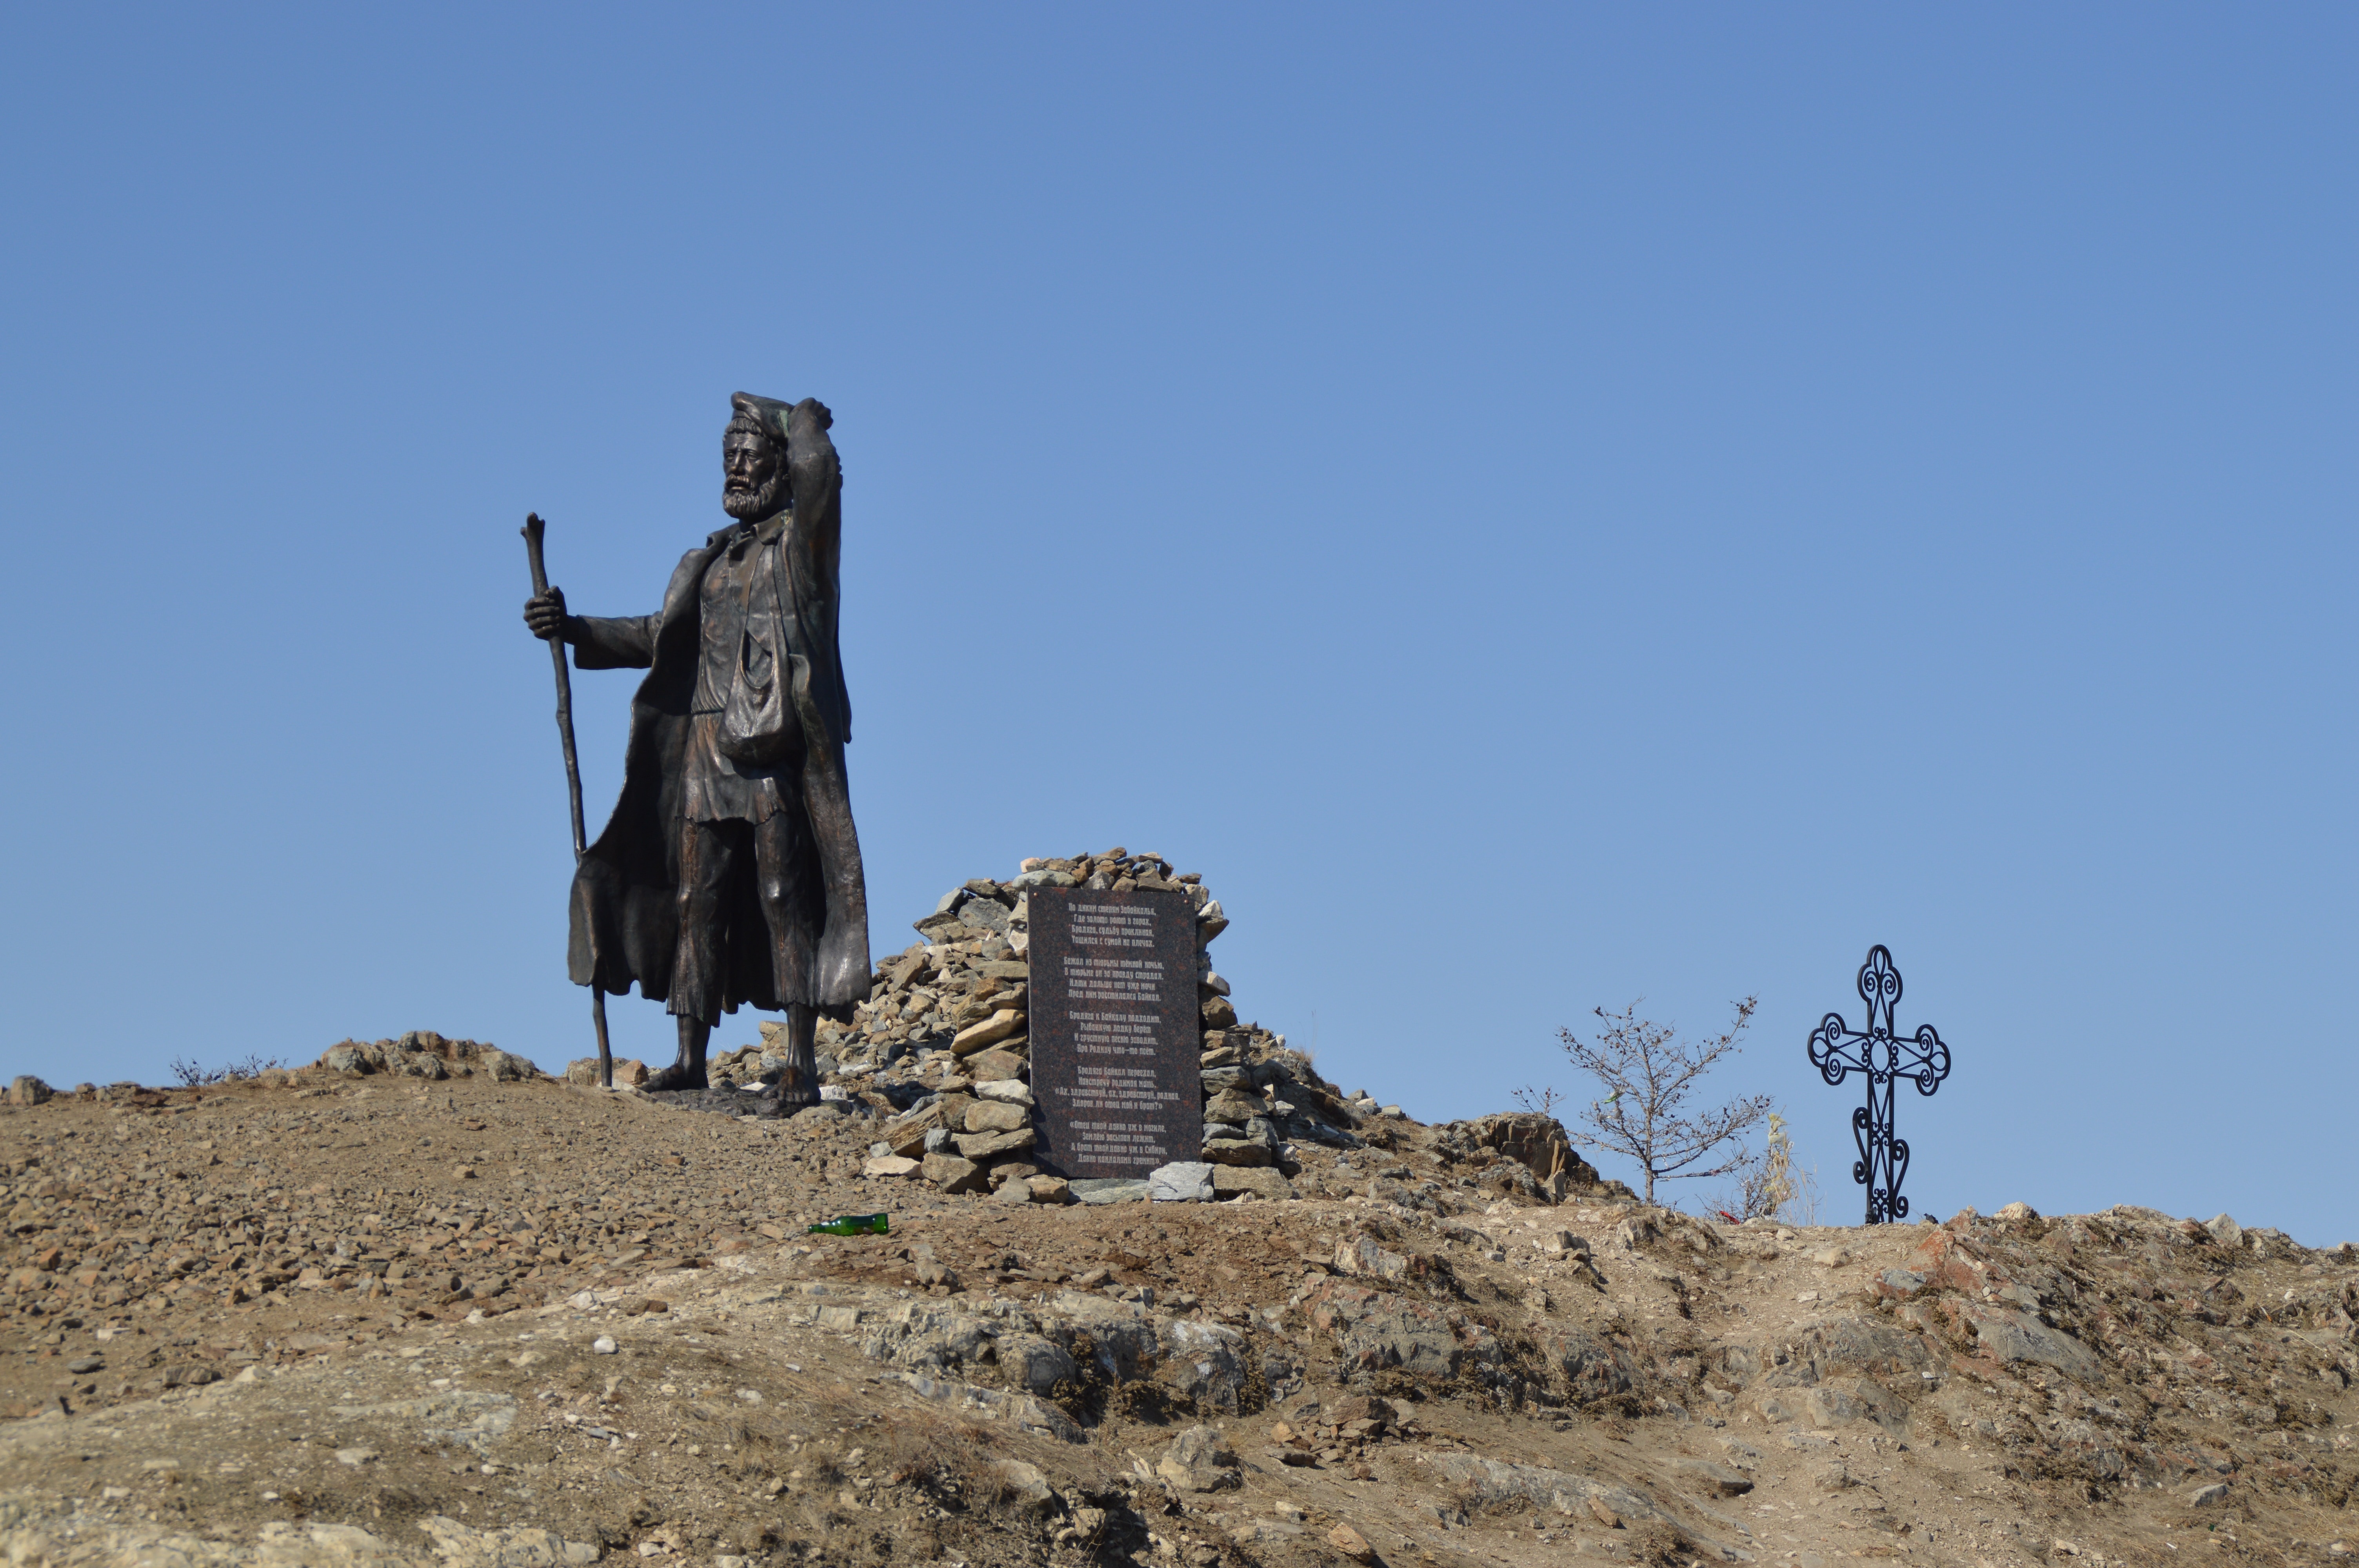 moses statue on brown dirt and cross statue at distance during daytime